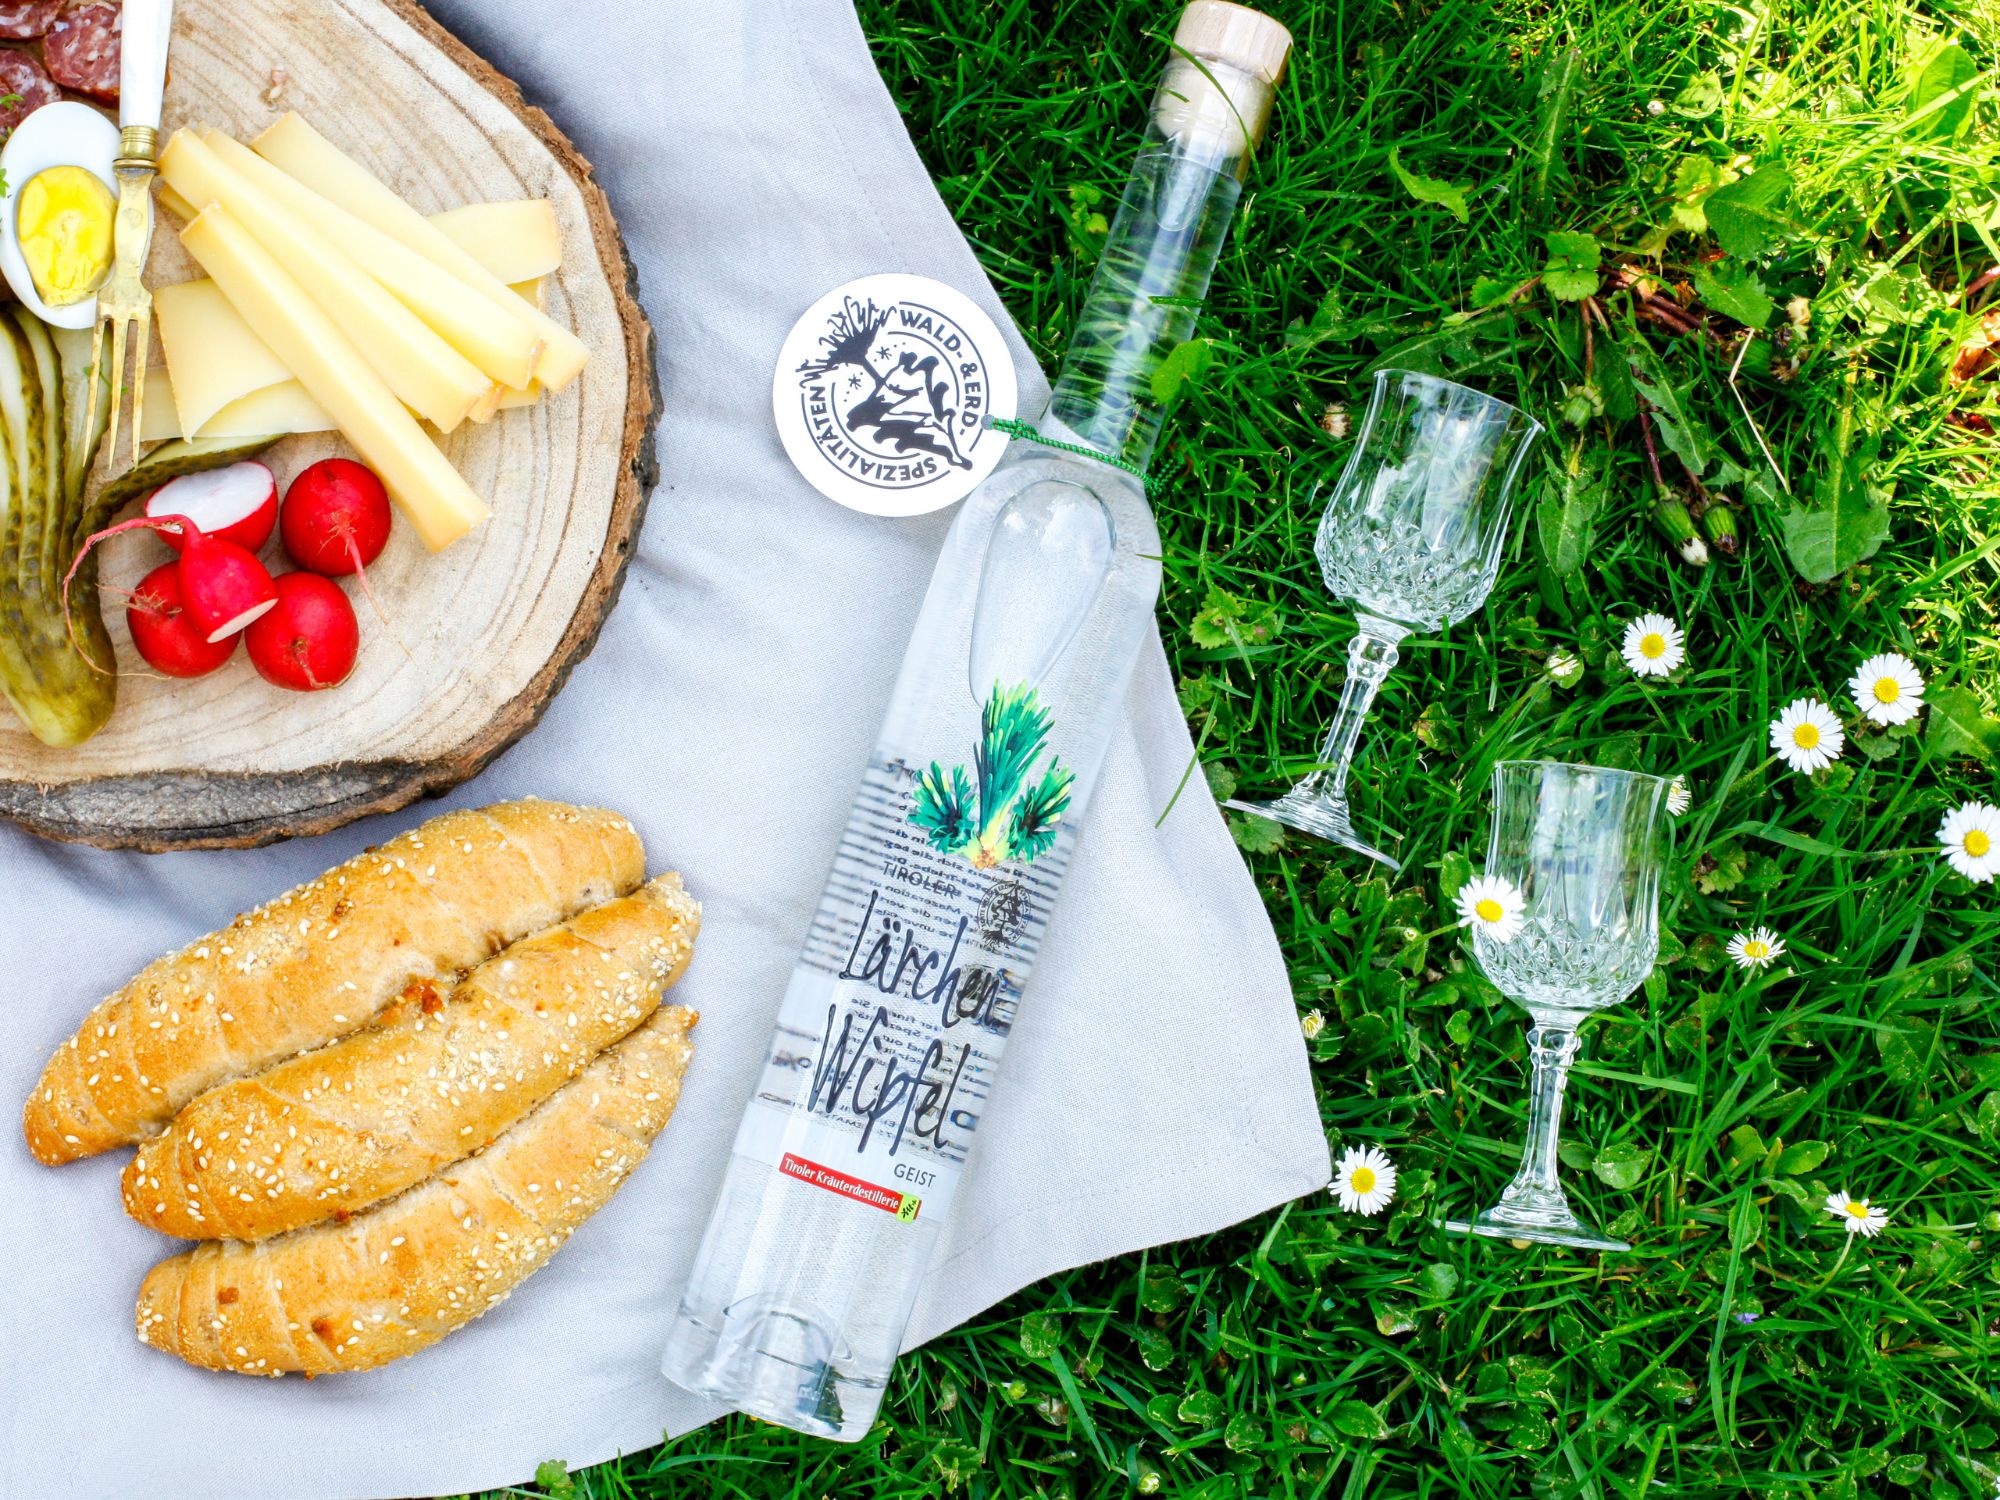 Schnapps from Tyrol with picnic